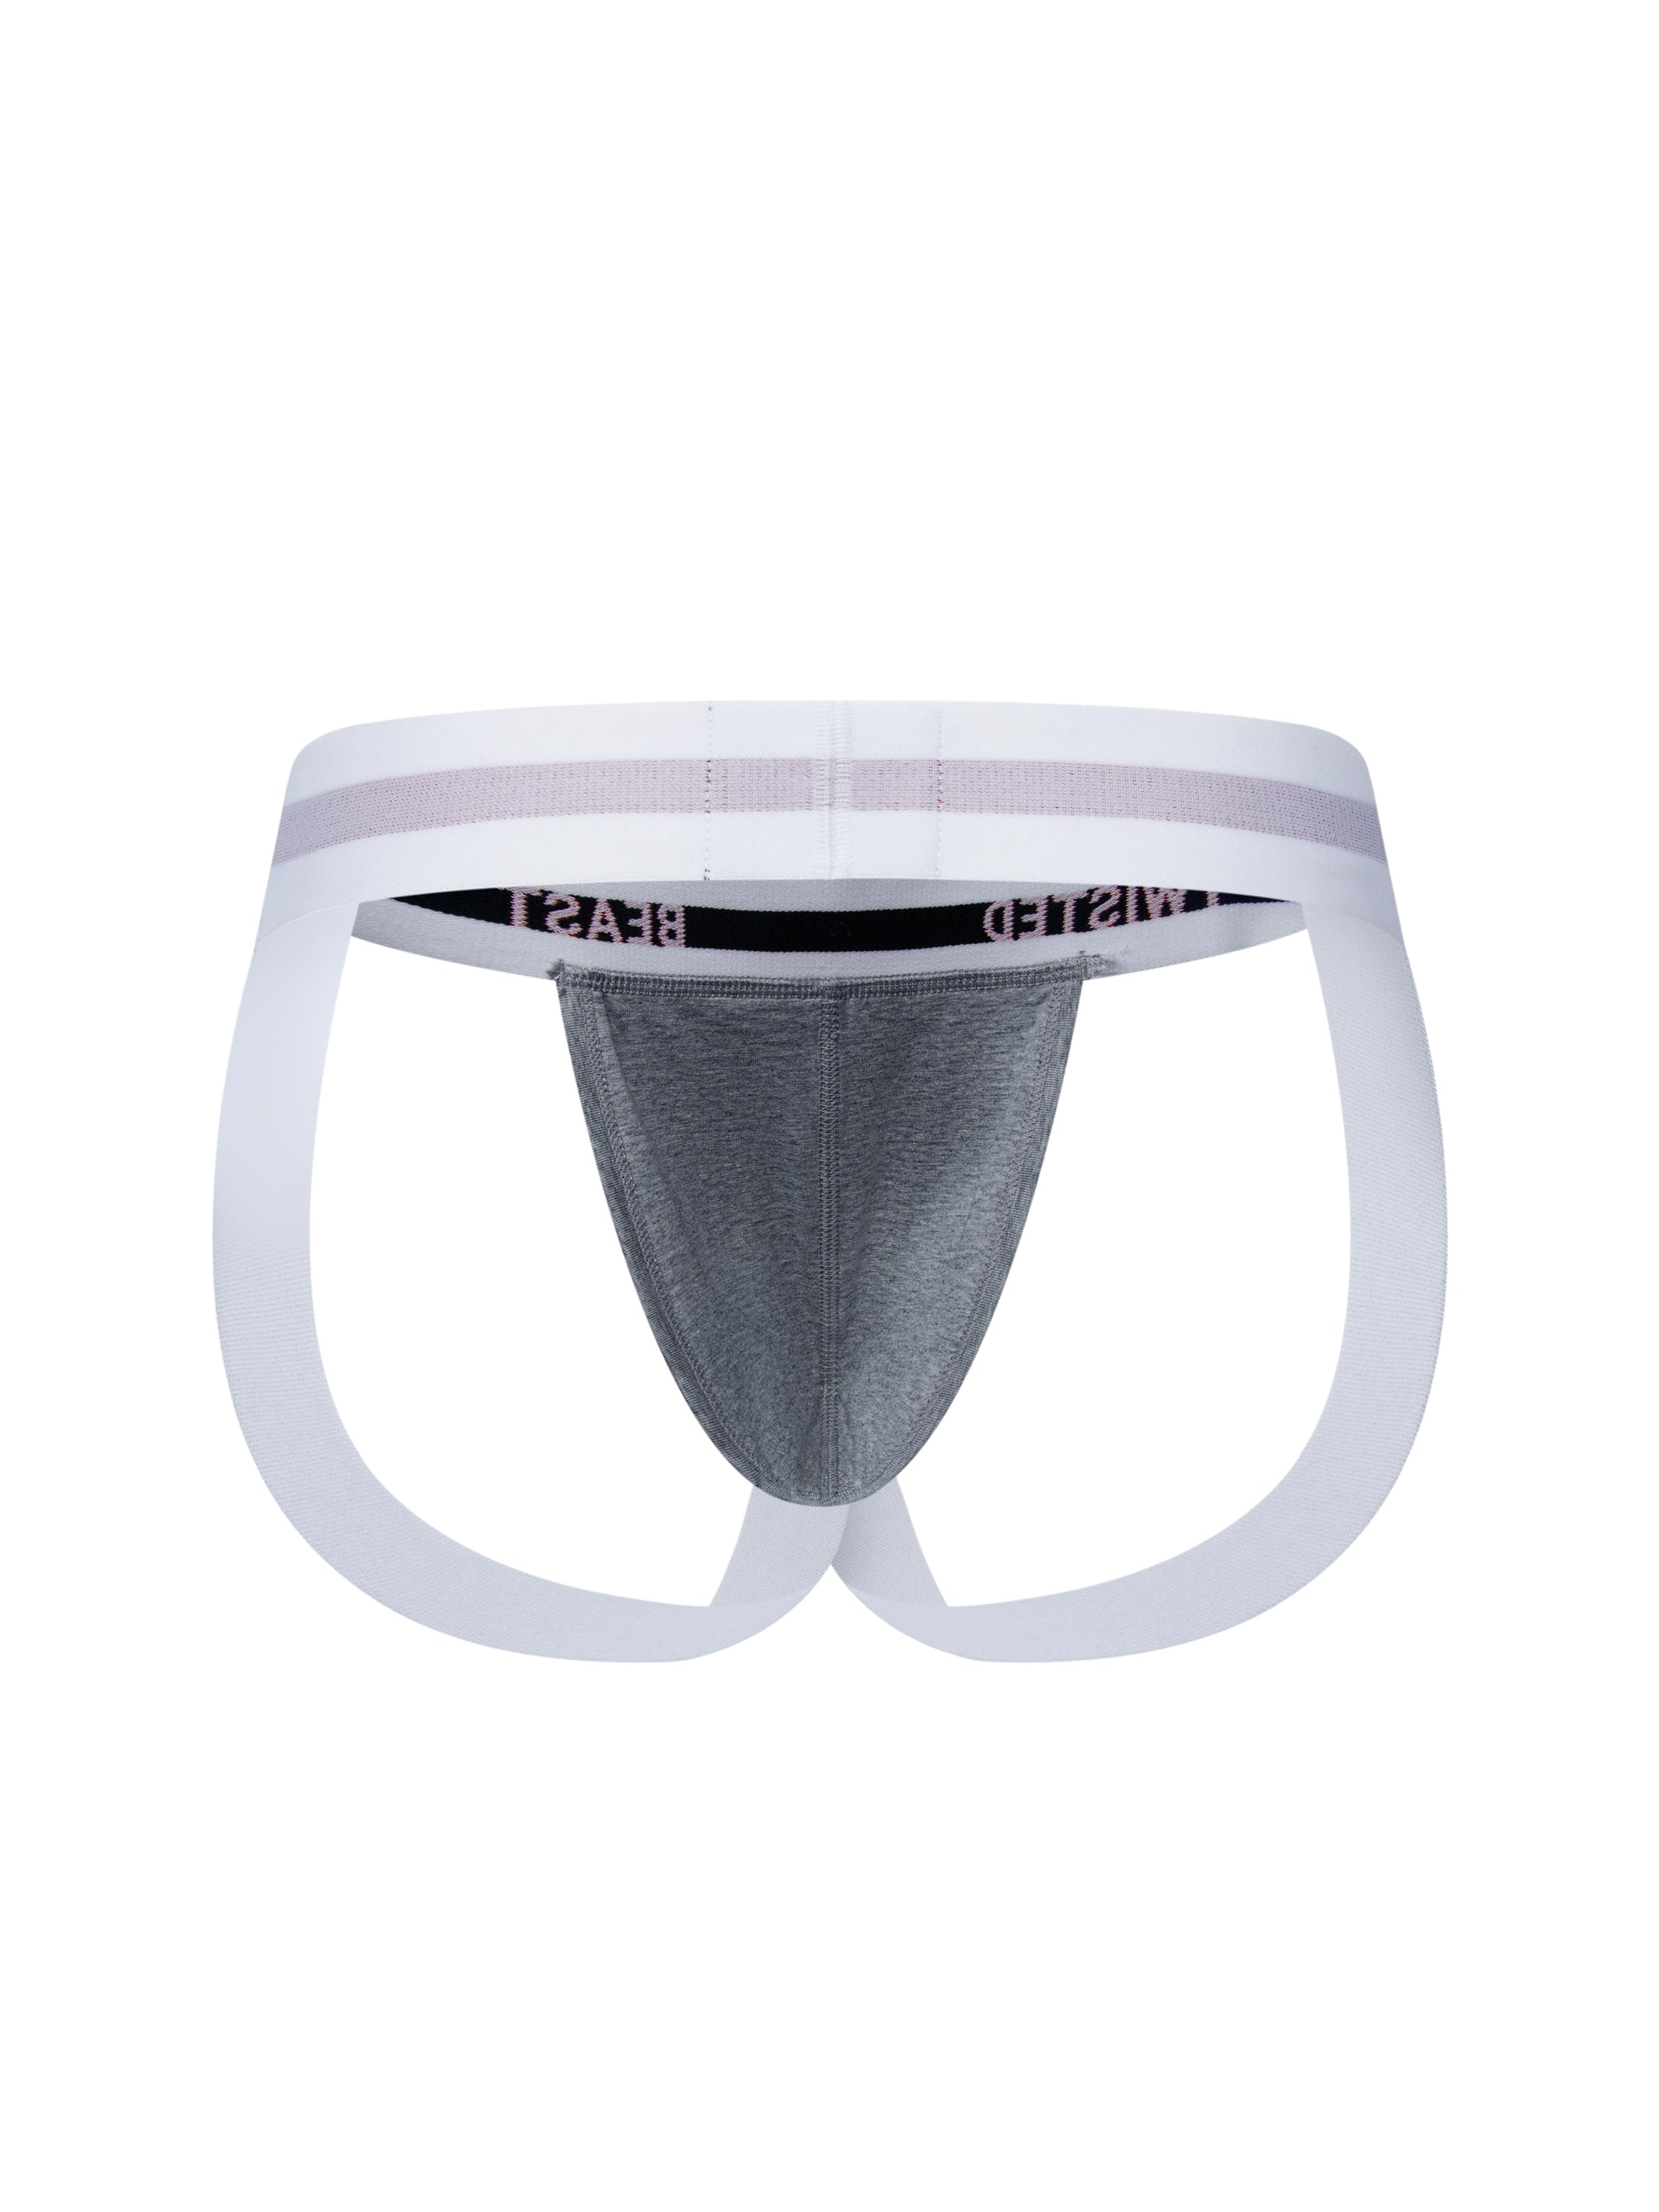 A product photo showing the back of a Insignia Jock in grey.